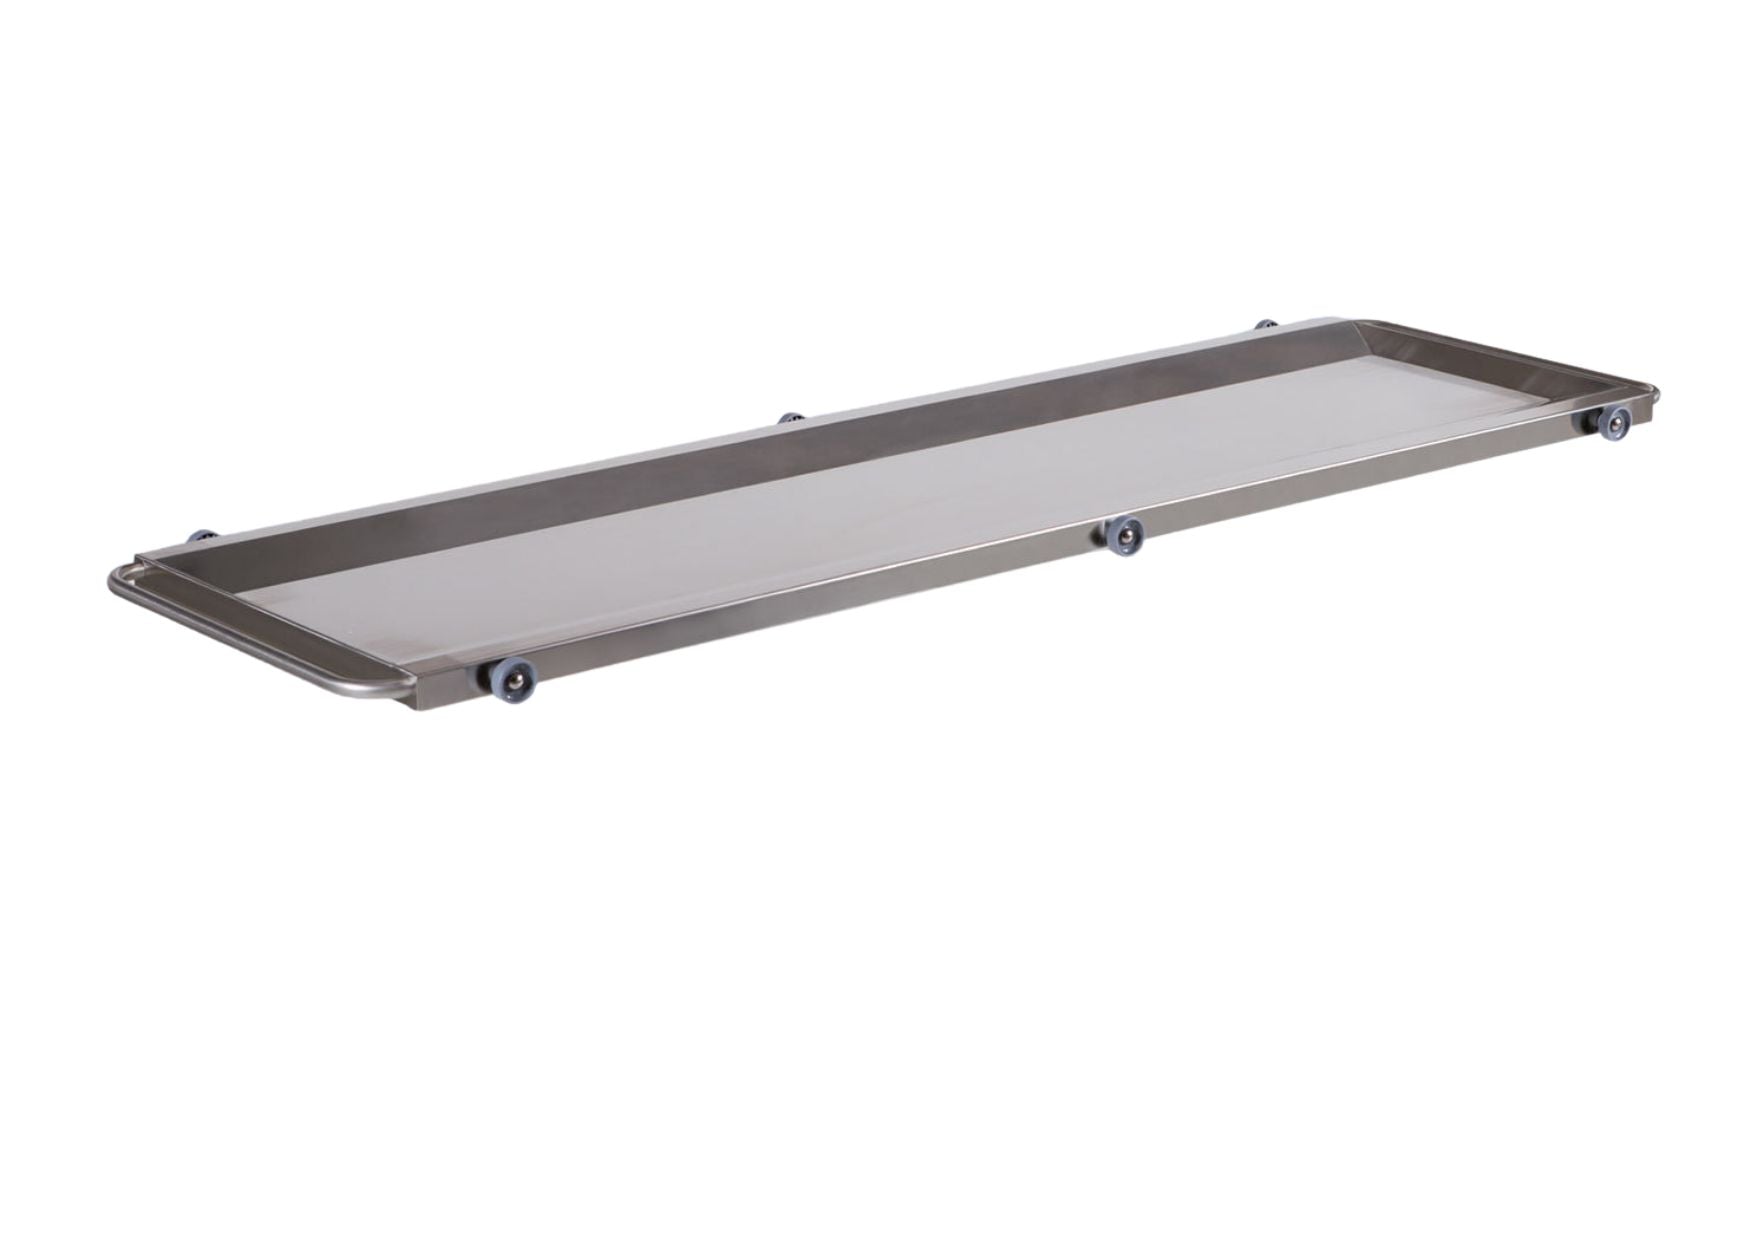 Stainless steel body tray with castors